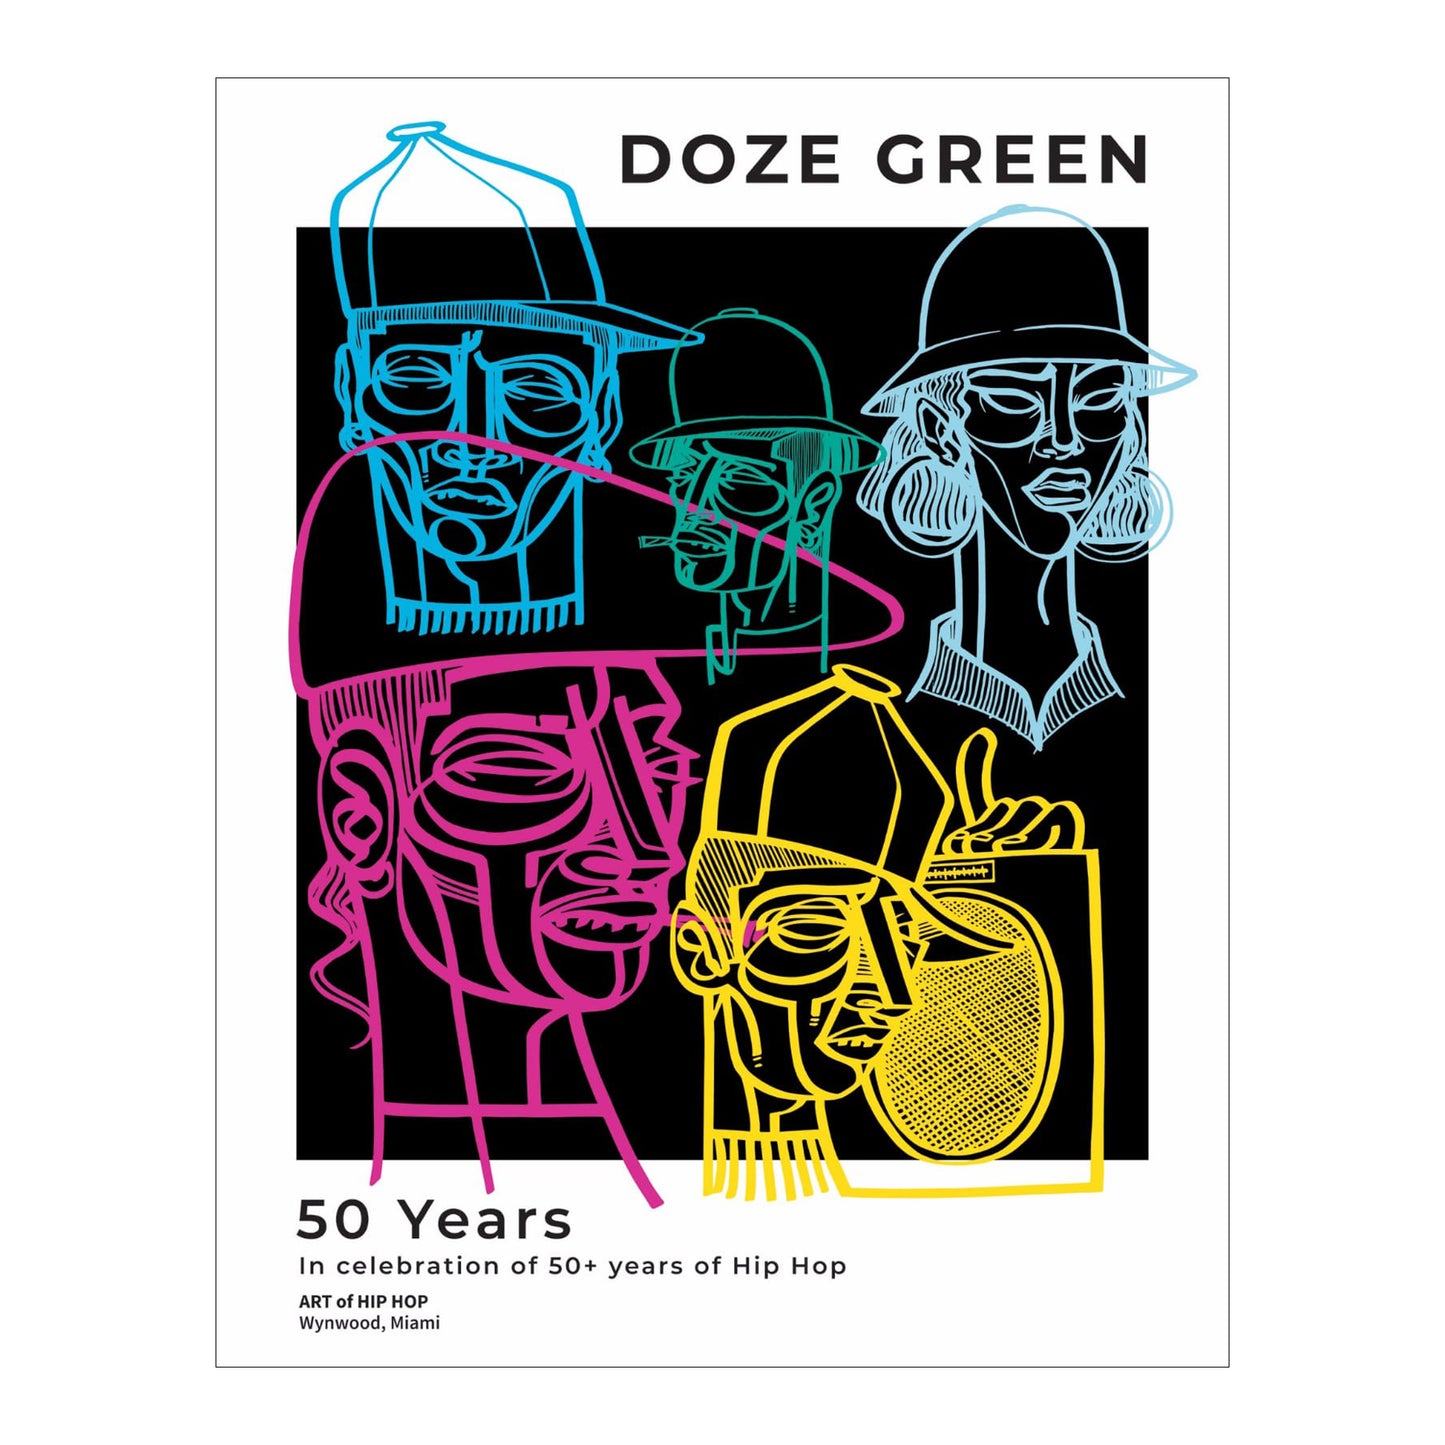 Doze Green Poster - "50 years of Hip Hop"